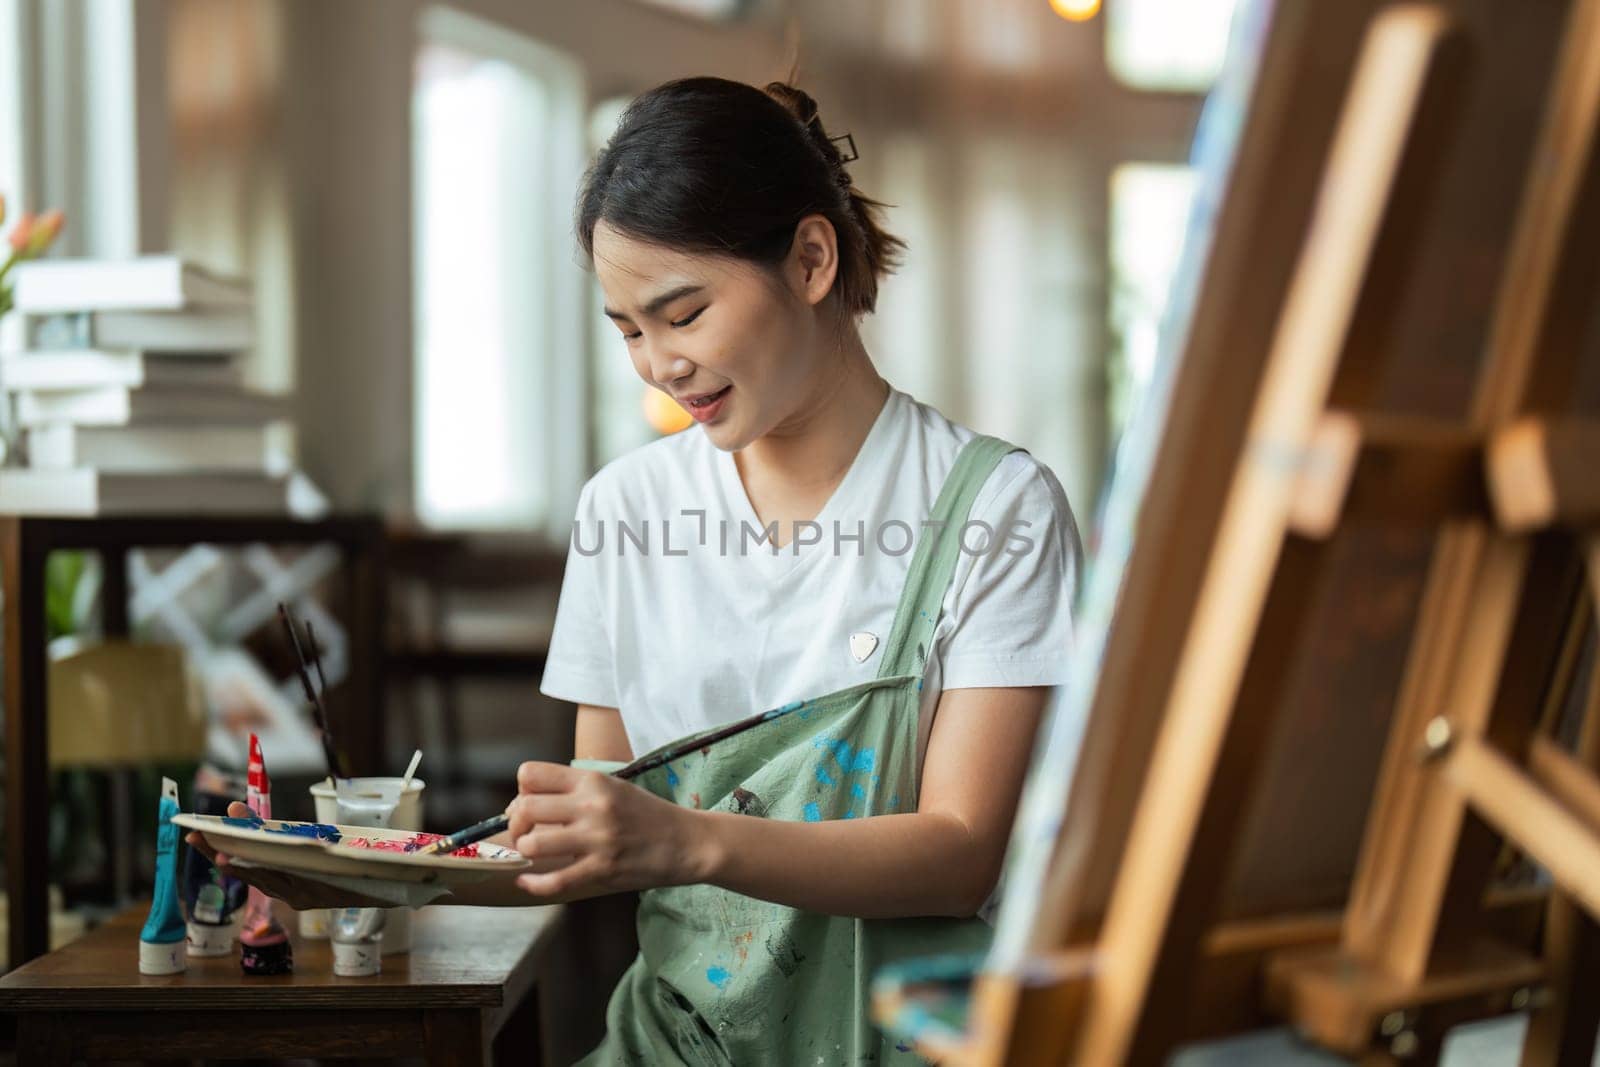 The artist is thinking about his painting with brush painting picture art, creativity, artistic and artwork, painting, Colorful artist brush and paint palette concept.